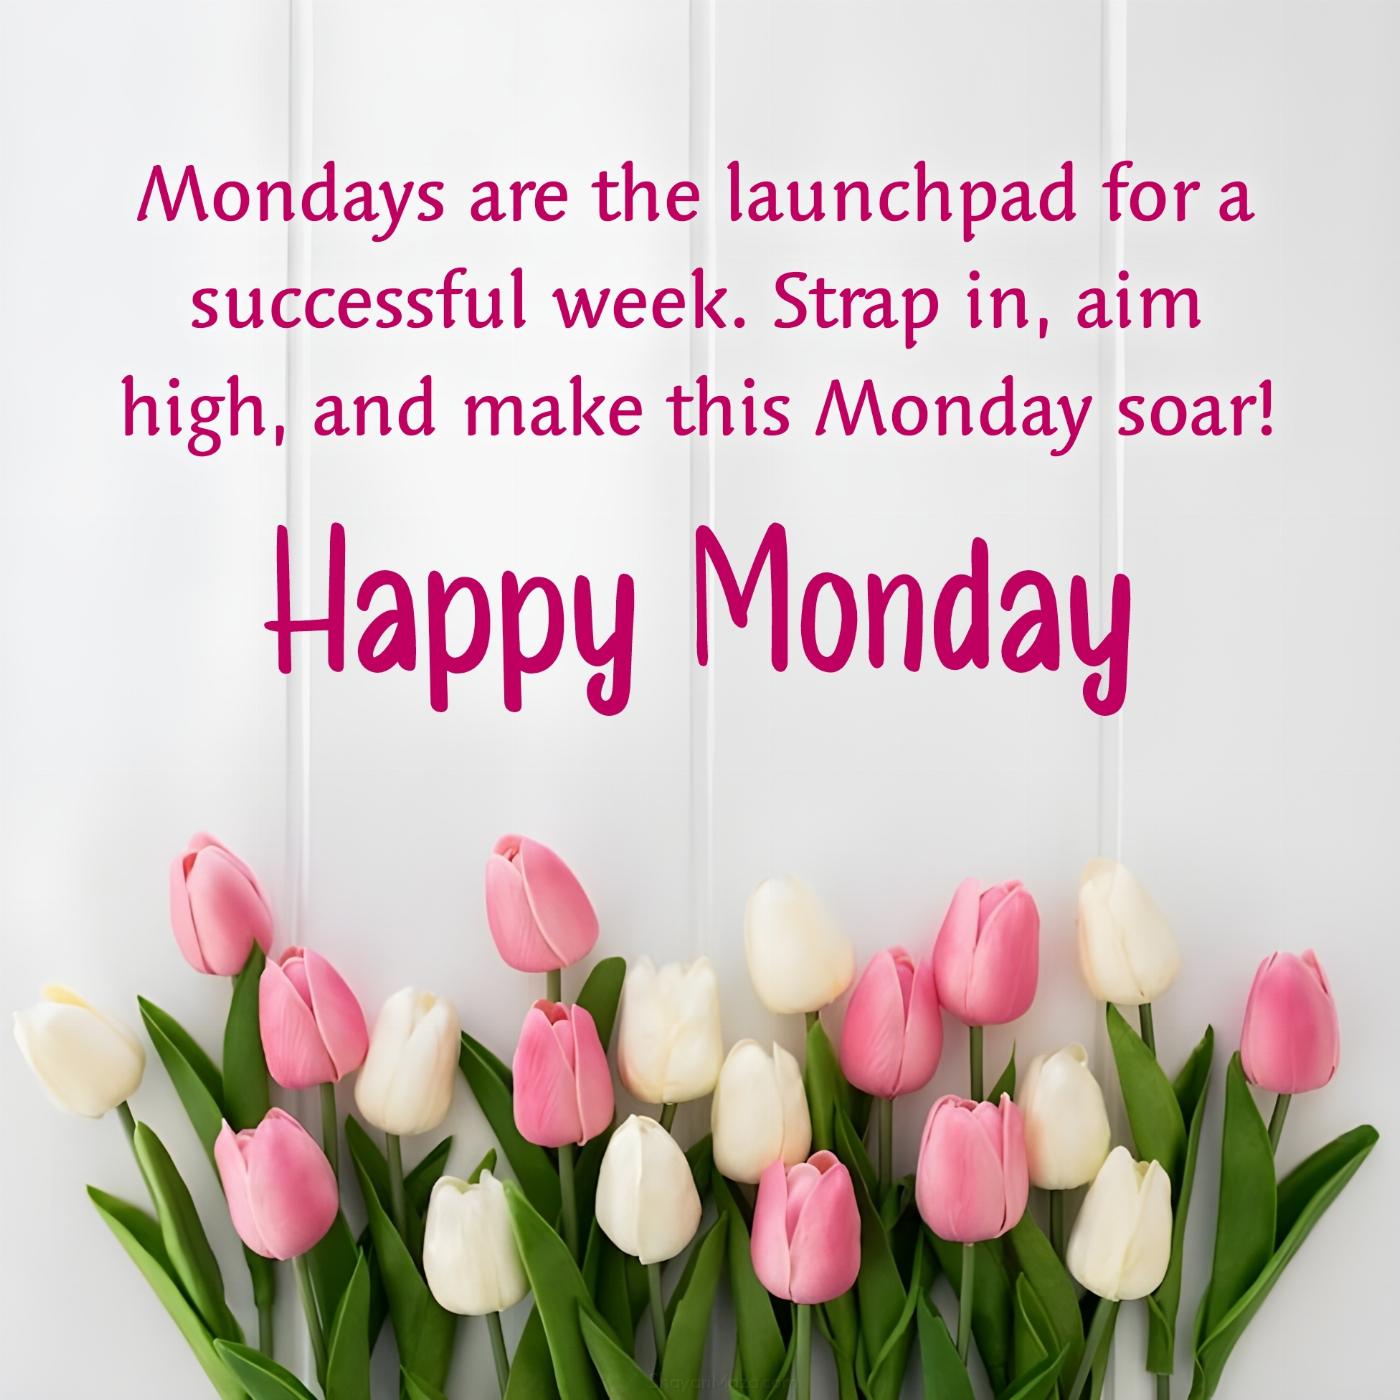 Mondays are the launchpad for a successful week